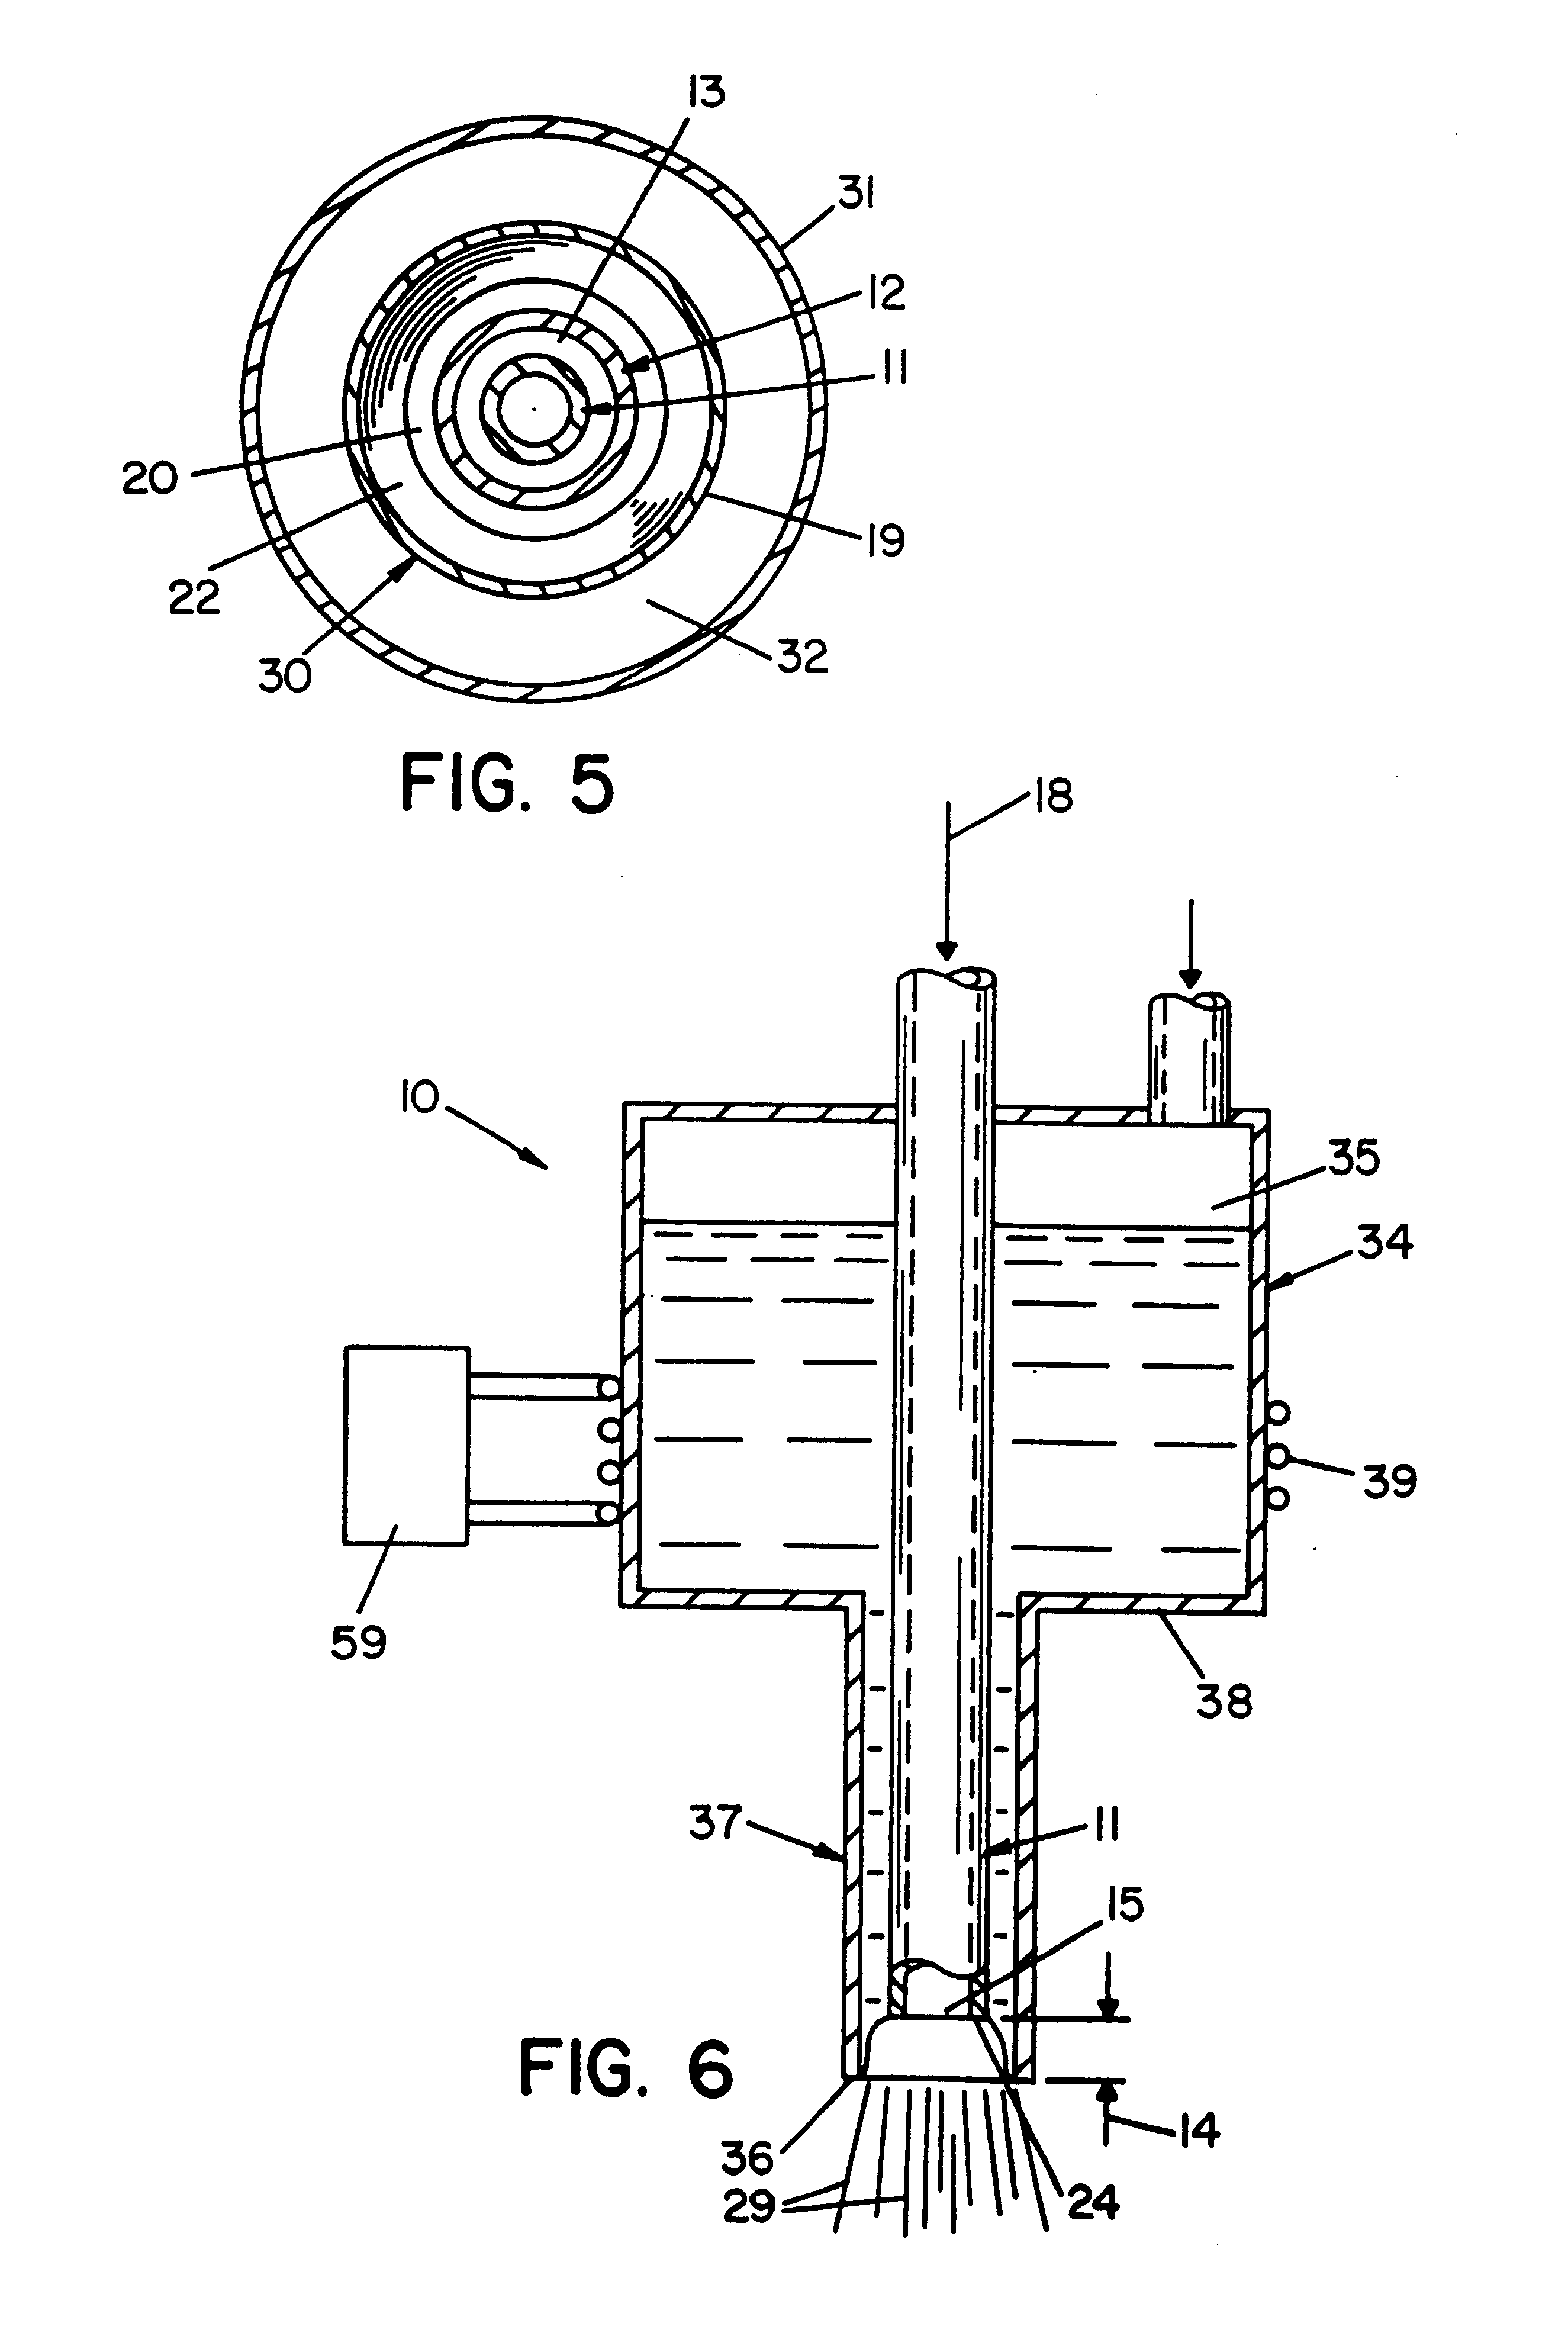 Process and apparatus for the production of nanofibers